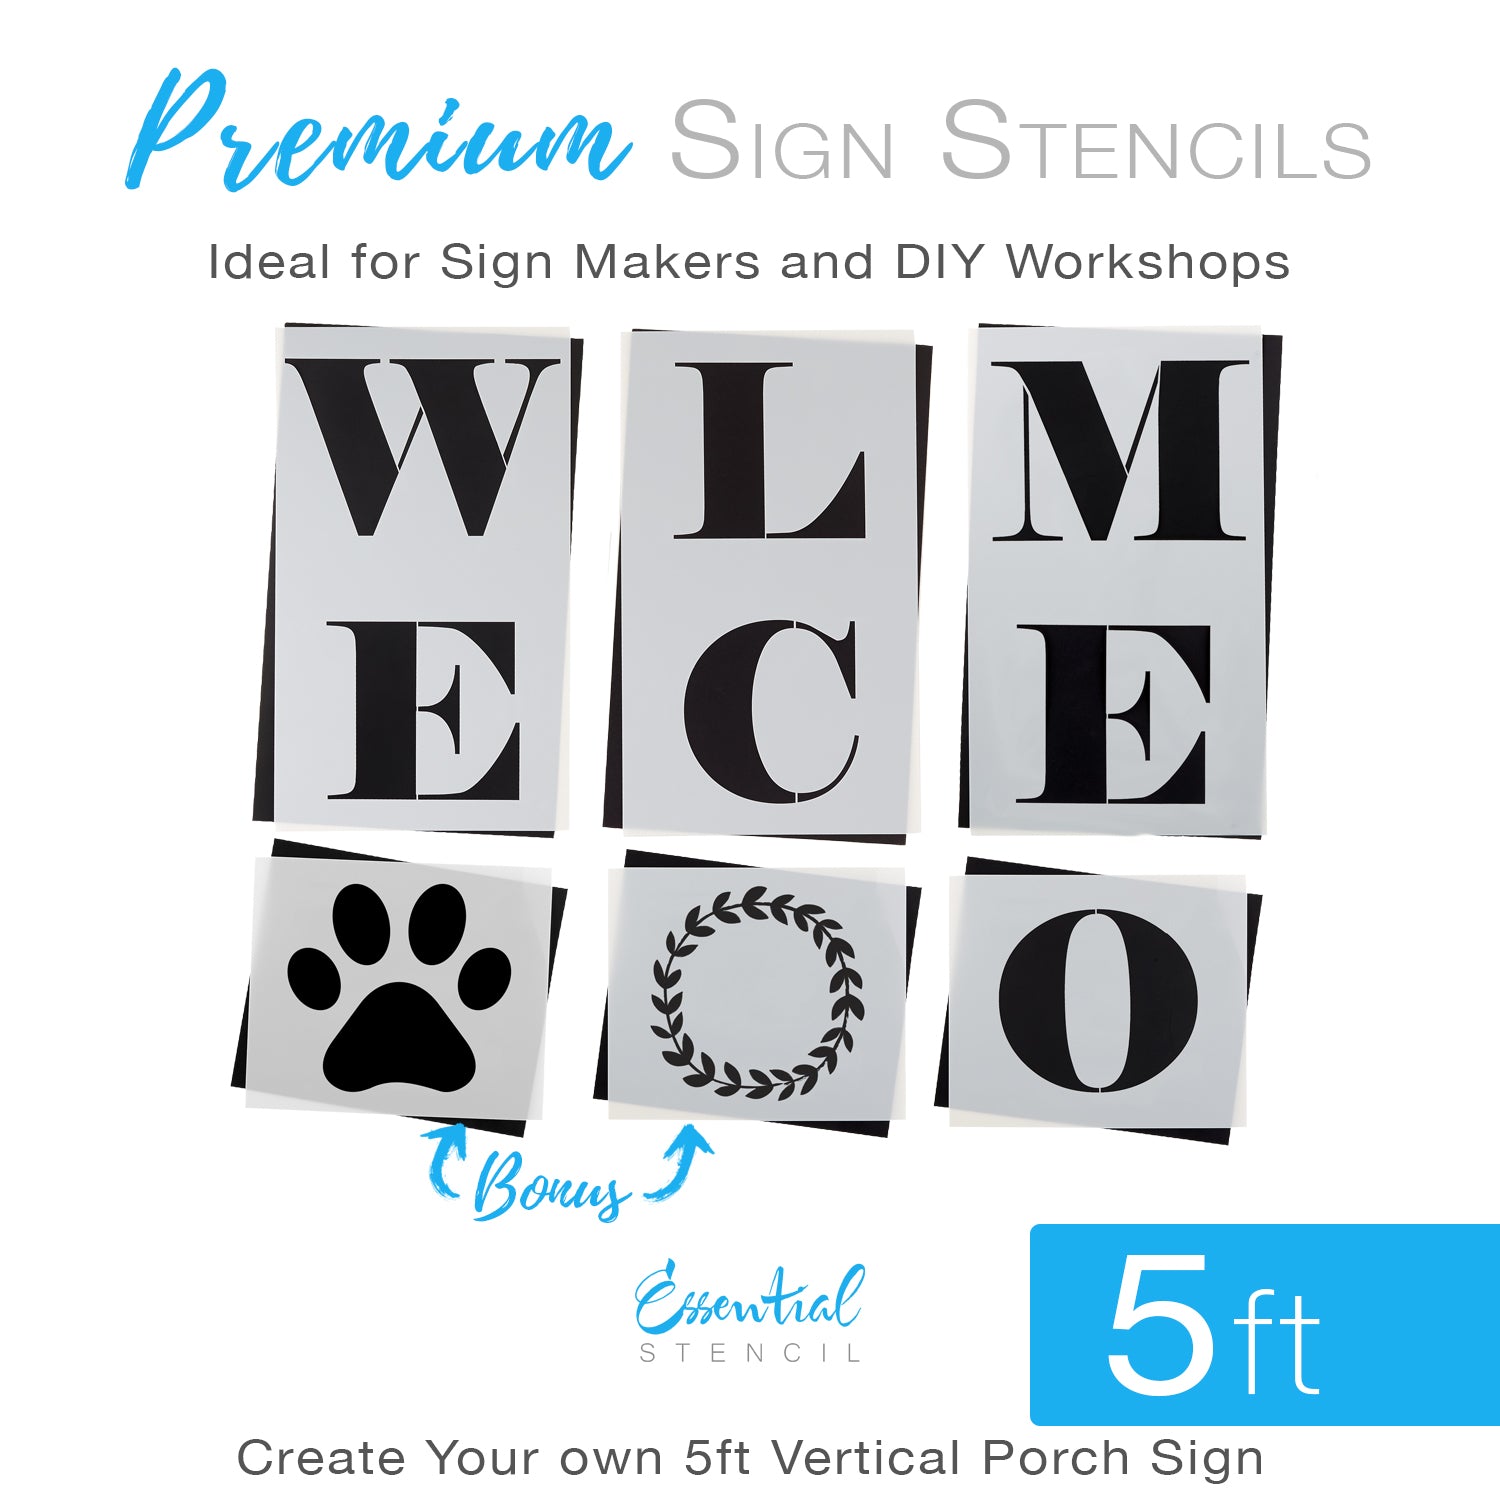 WELCOME STENCIL - Create a WELCOME SIGN Yourself - Porch Stencil